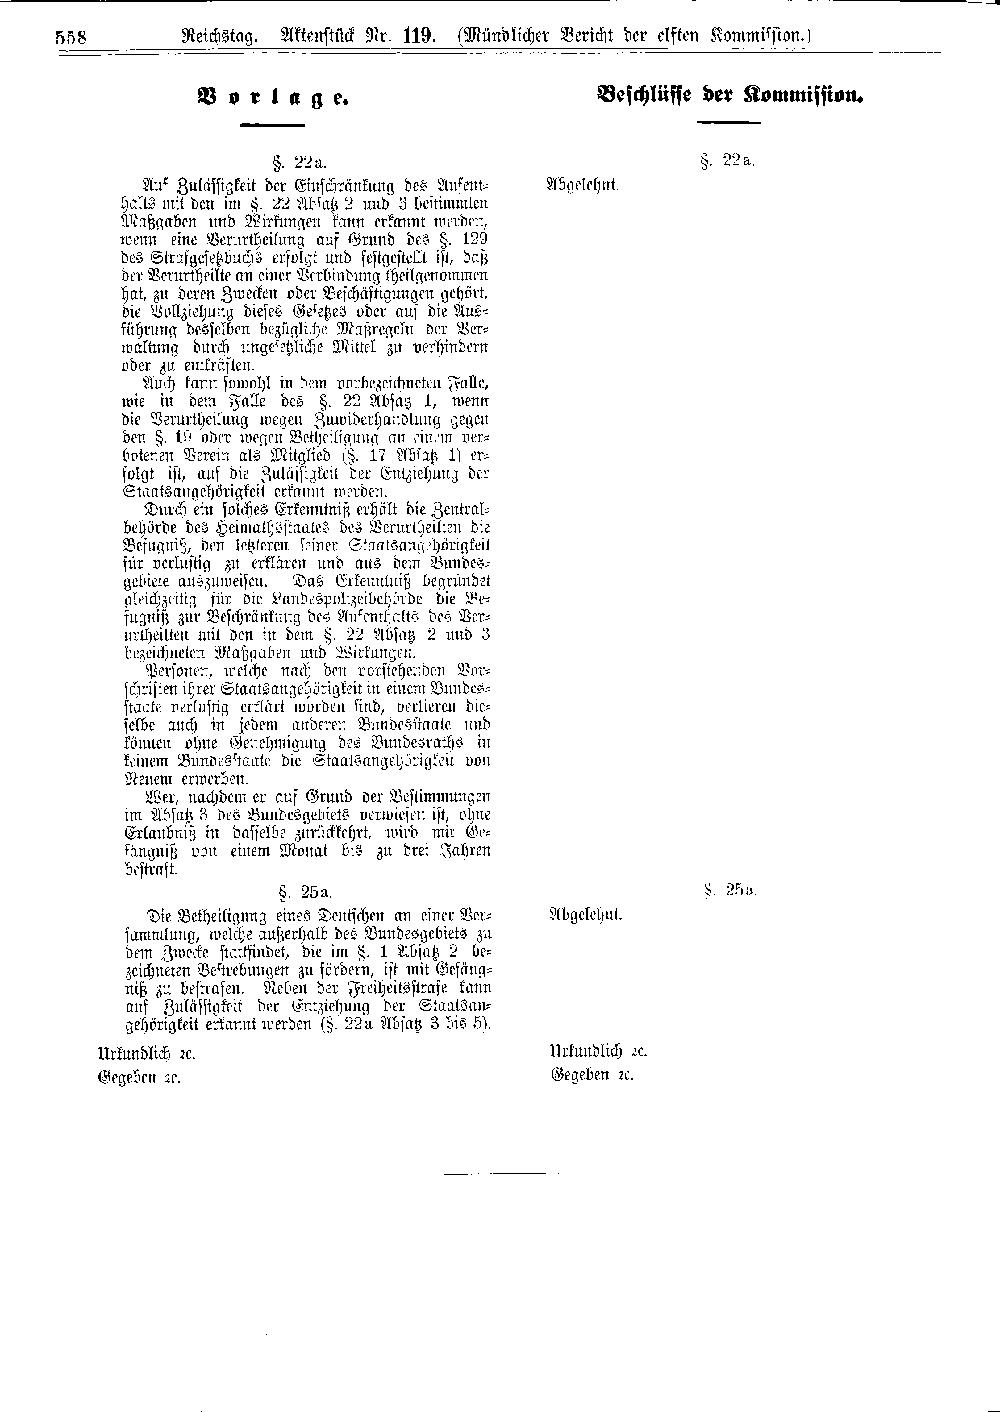 Scan of page 558